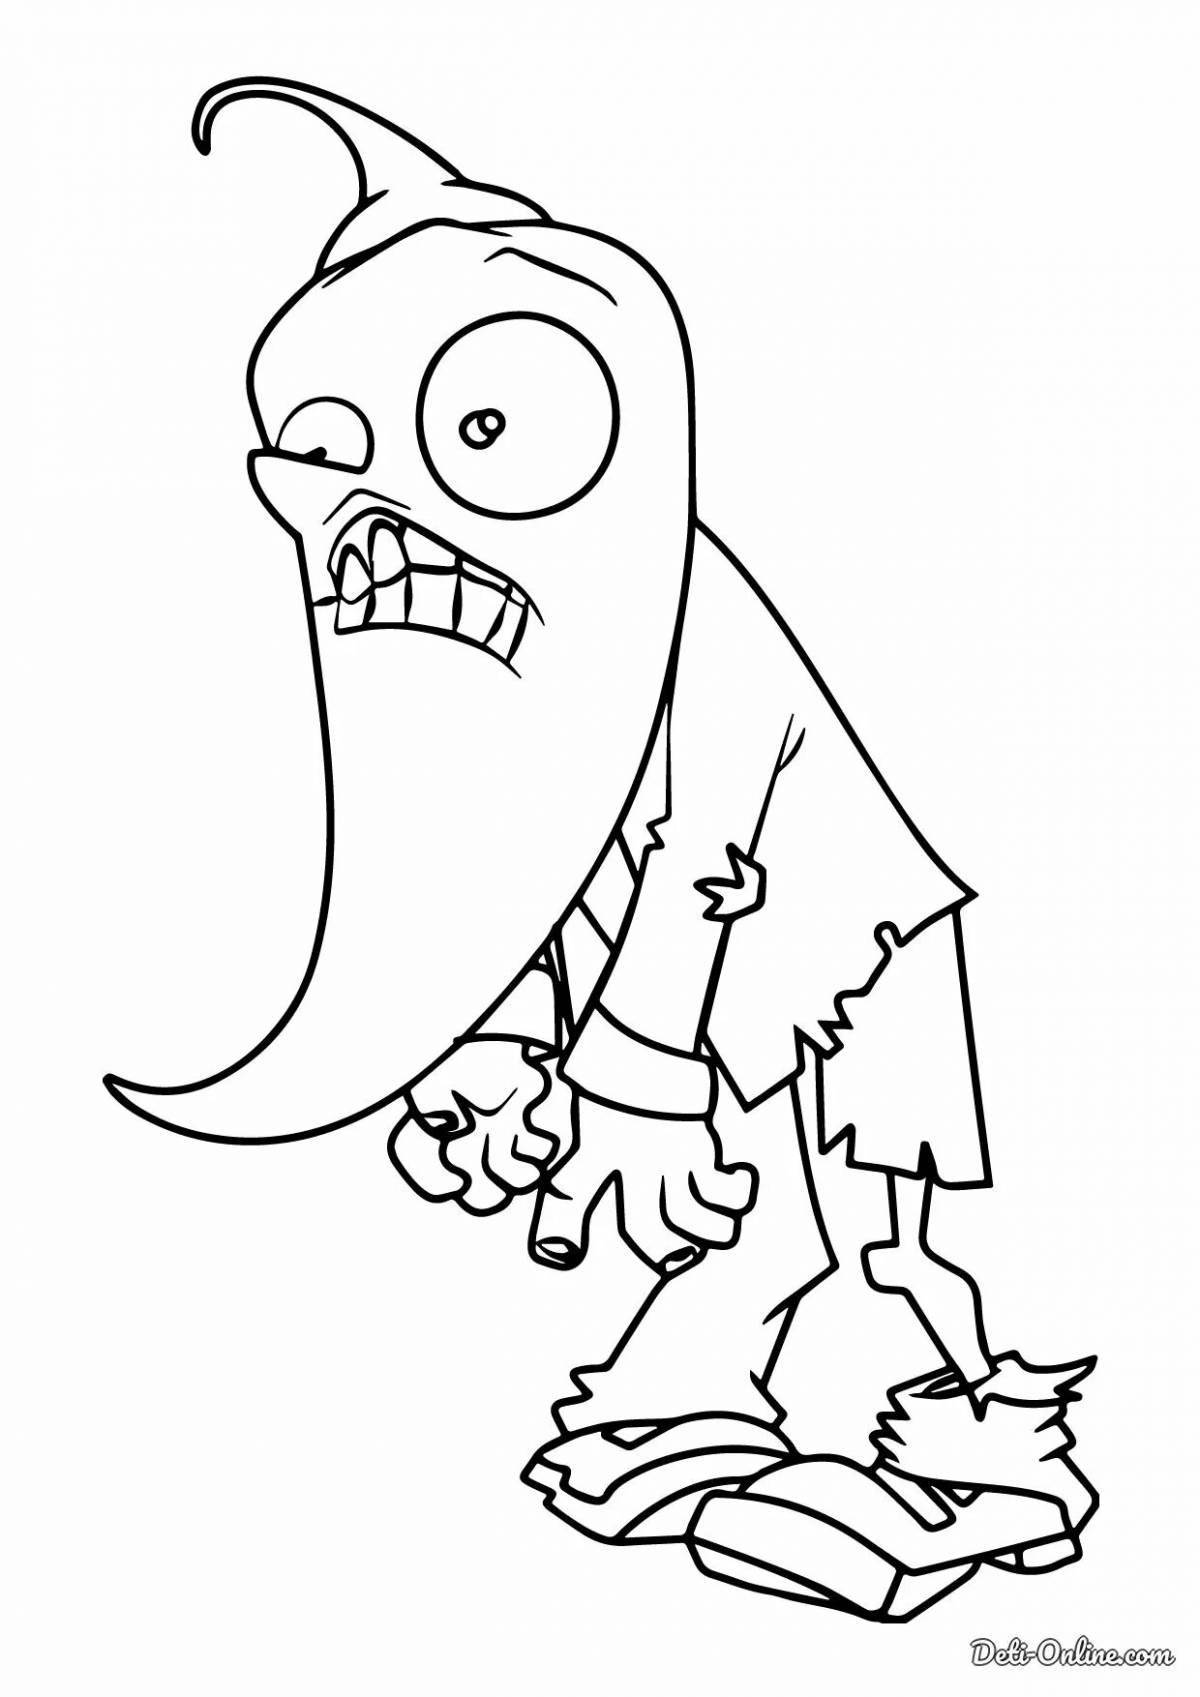 Grim zombie coloring book for kids